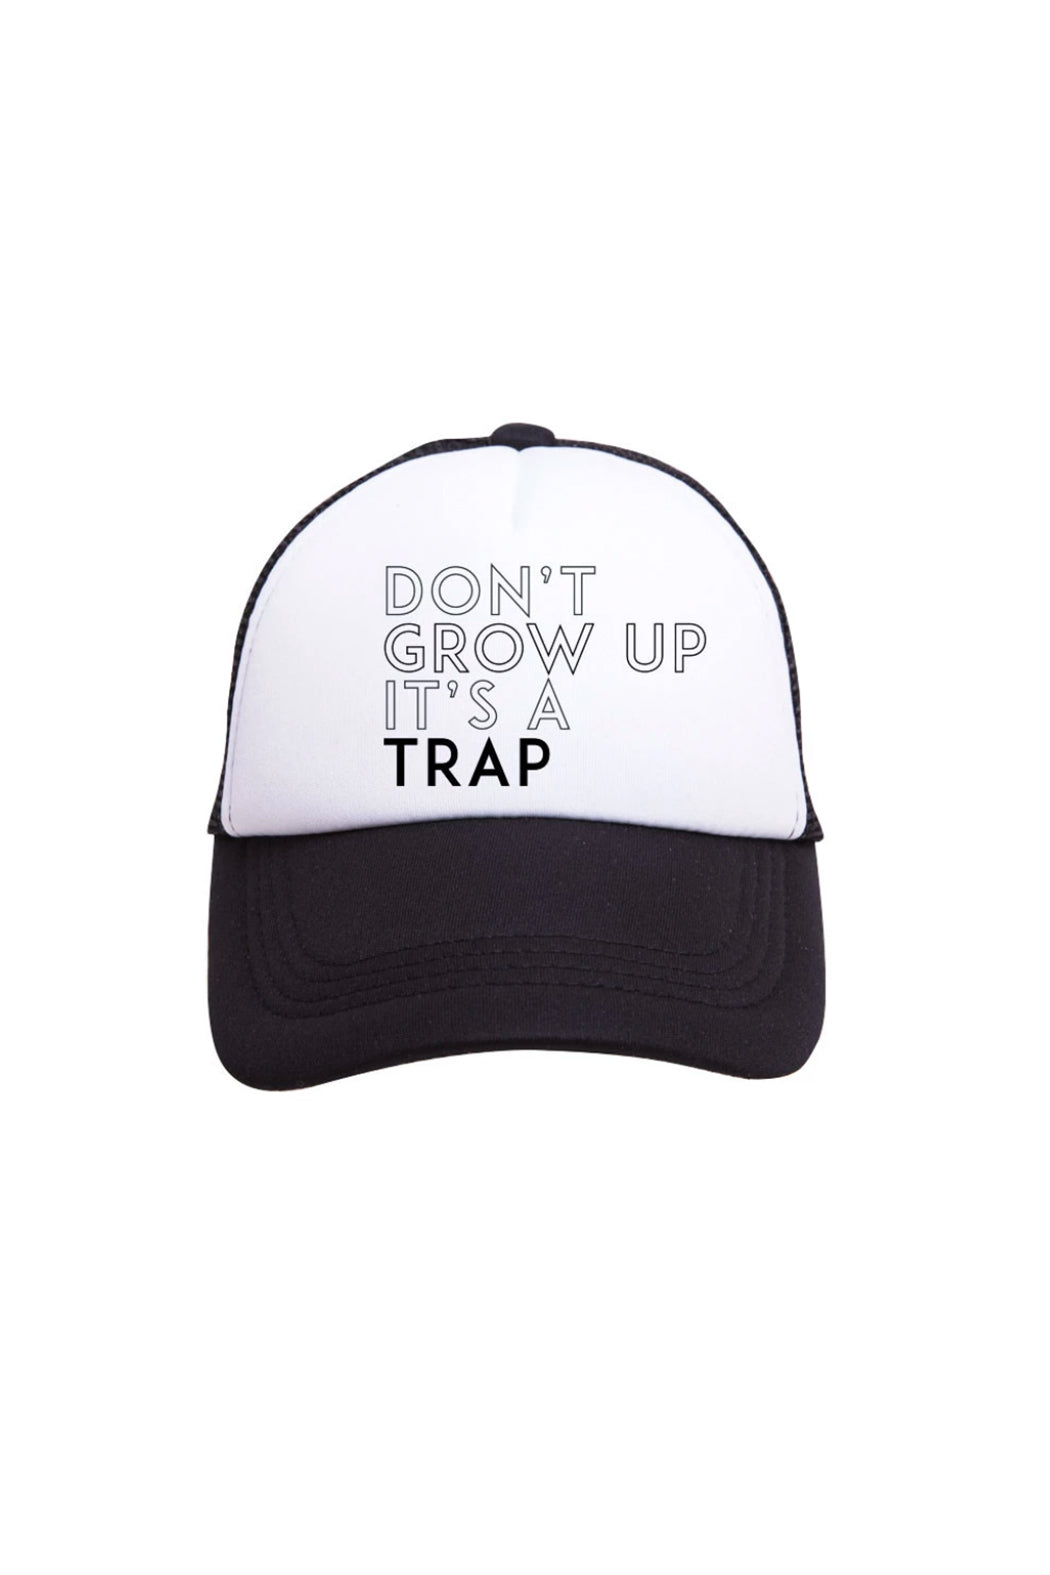 Tiny Trucker Co. "don't grow up" adult hat